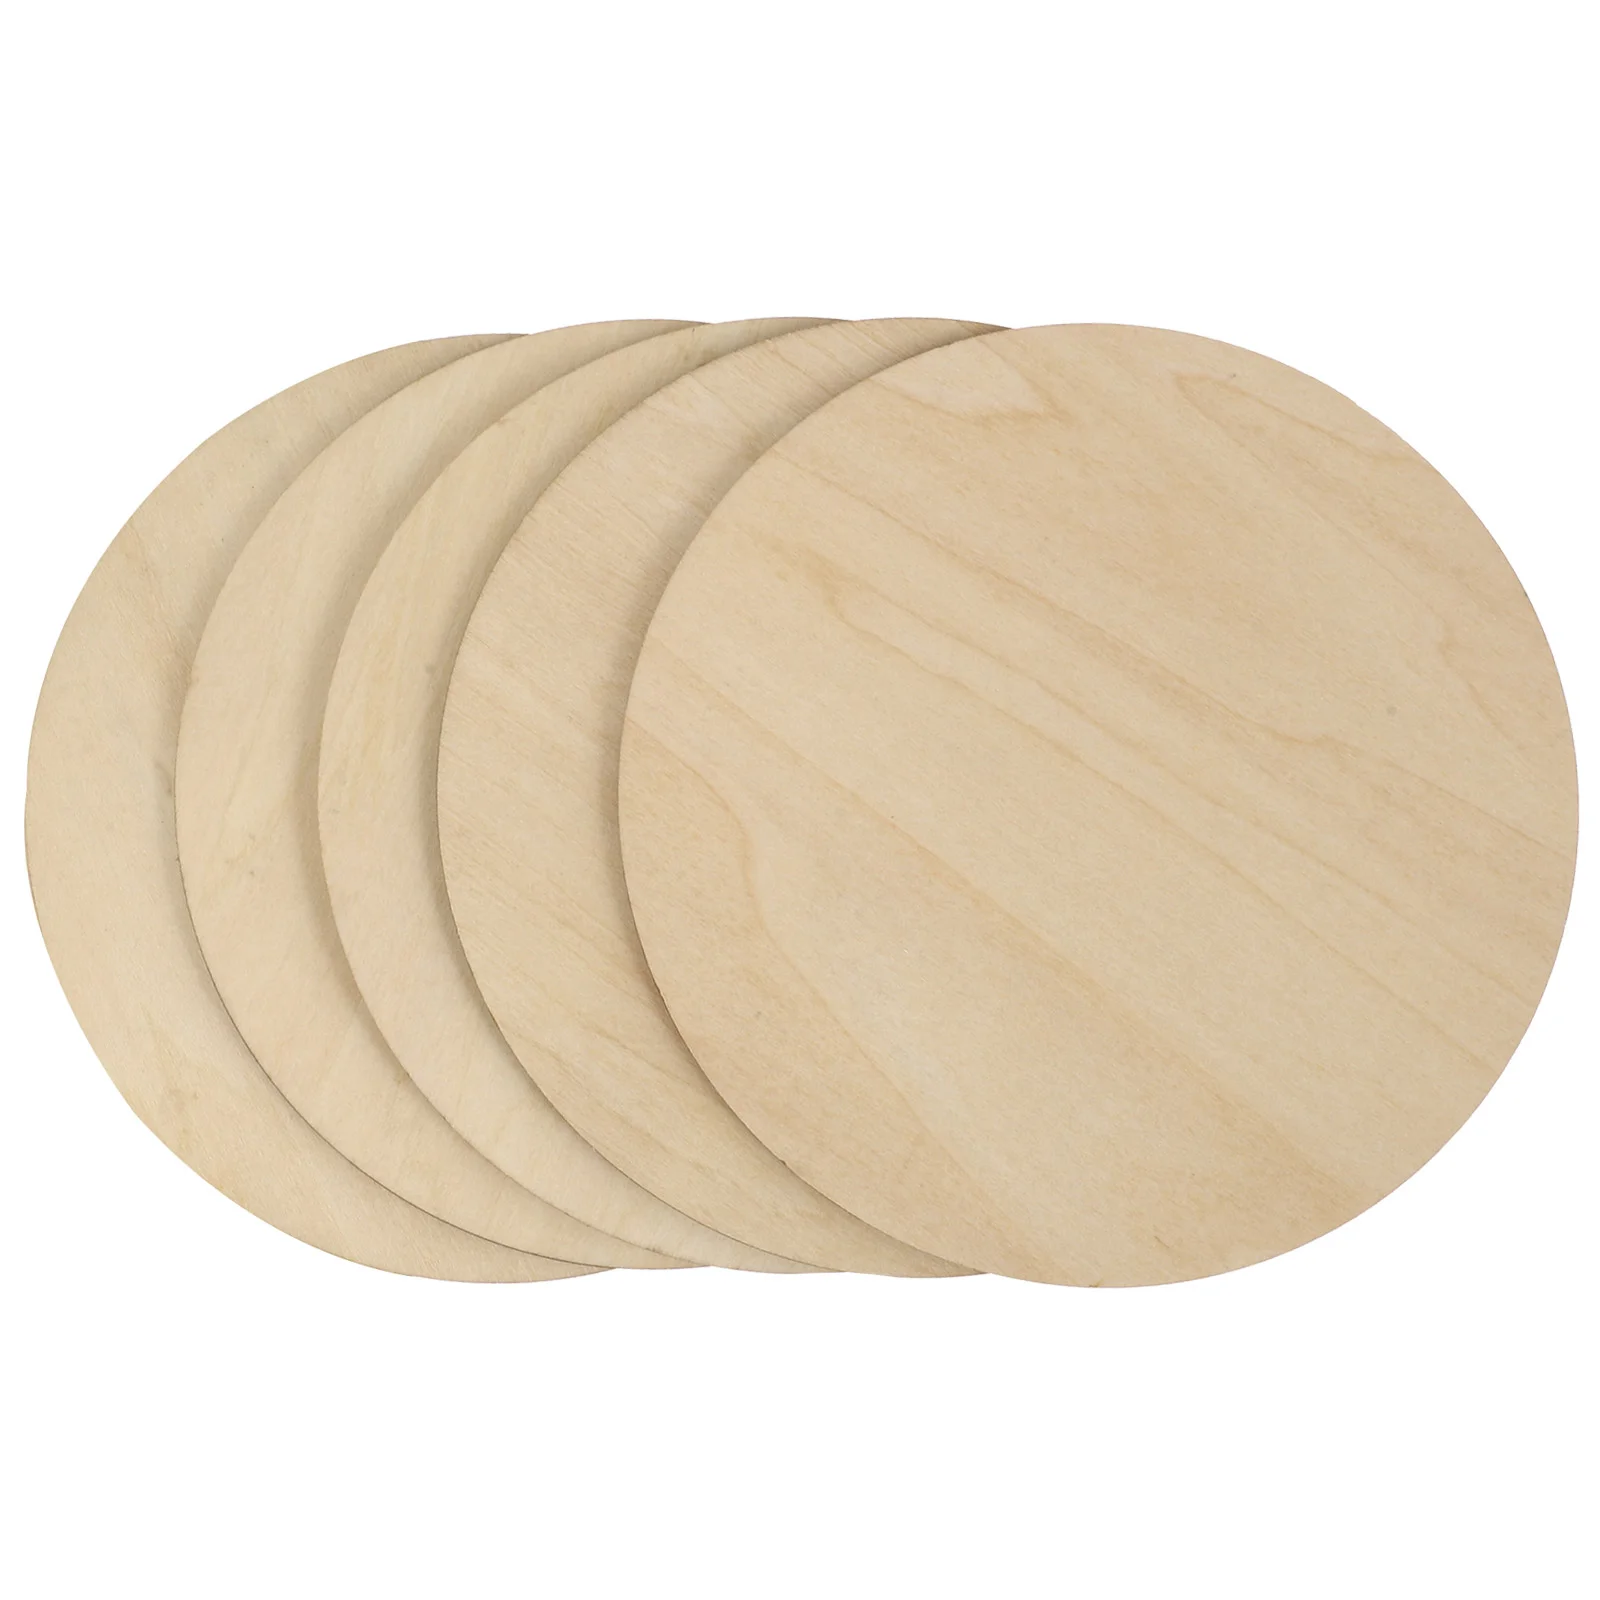 

Diameter 15cm 20cm Natural Unfinished Round Wood Slices Circles Discs for DIY Craft kids Christmas Painting Toys Ornament Decors